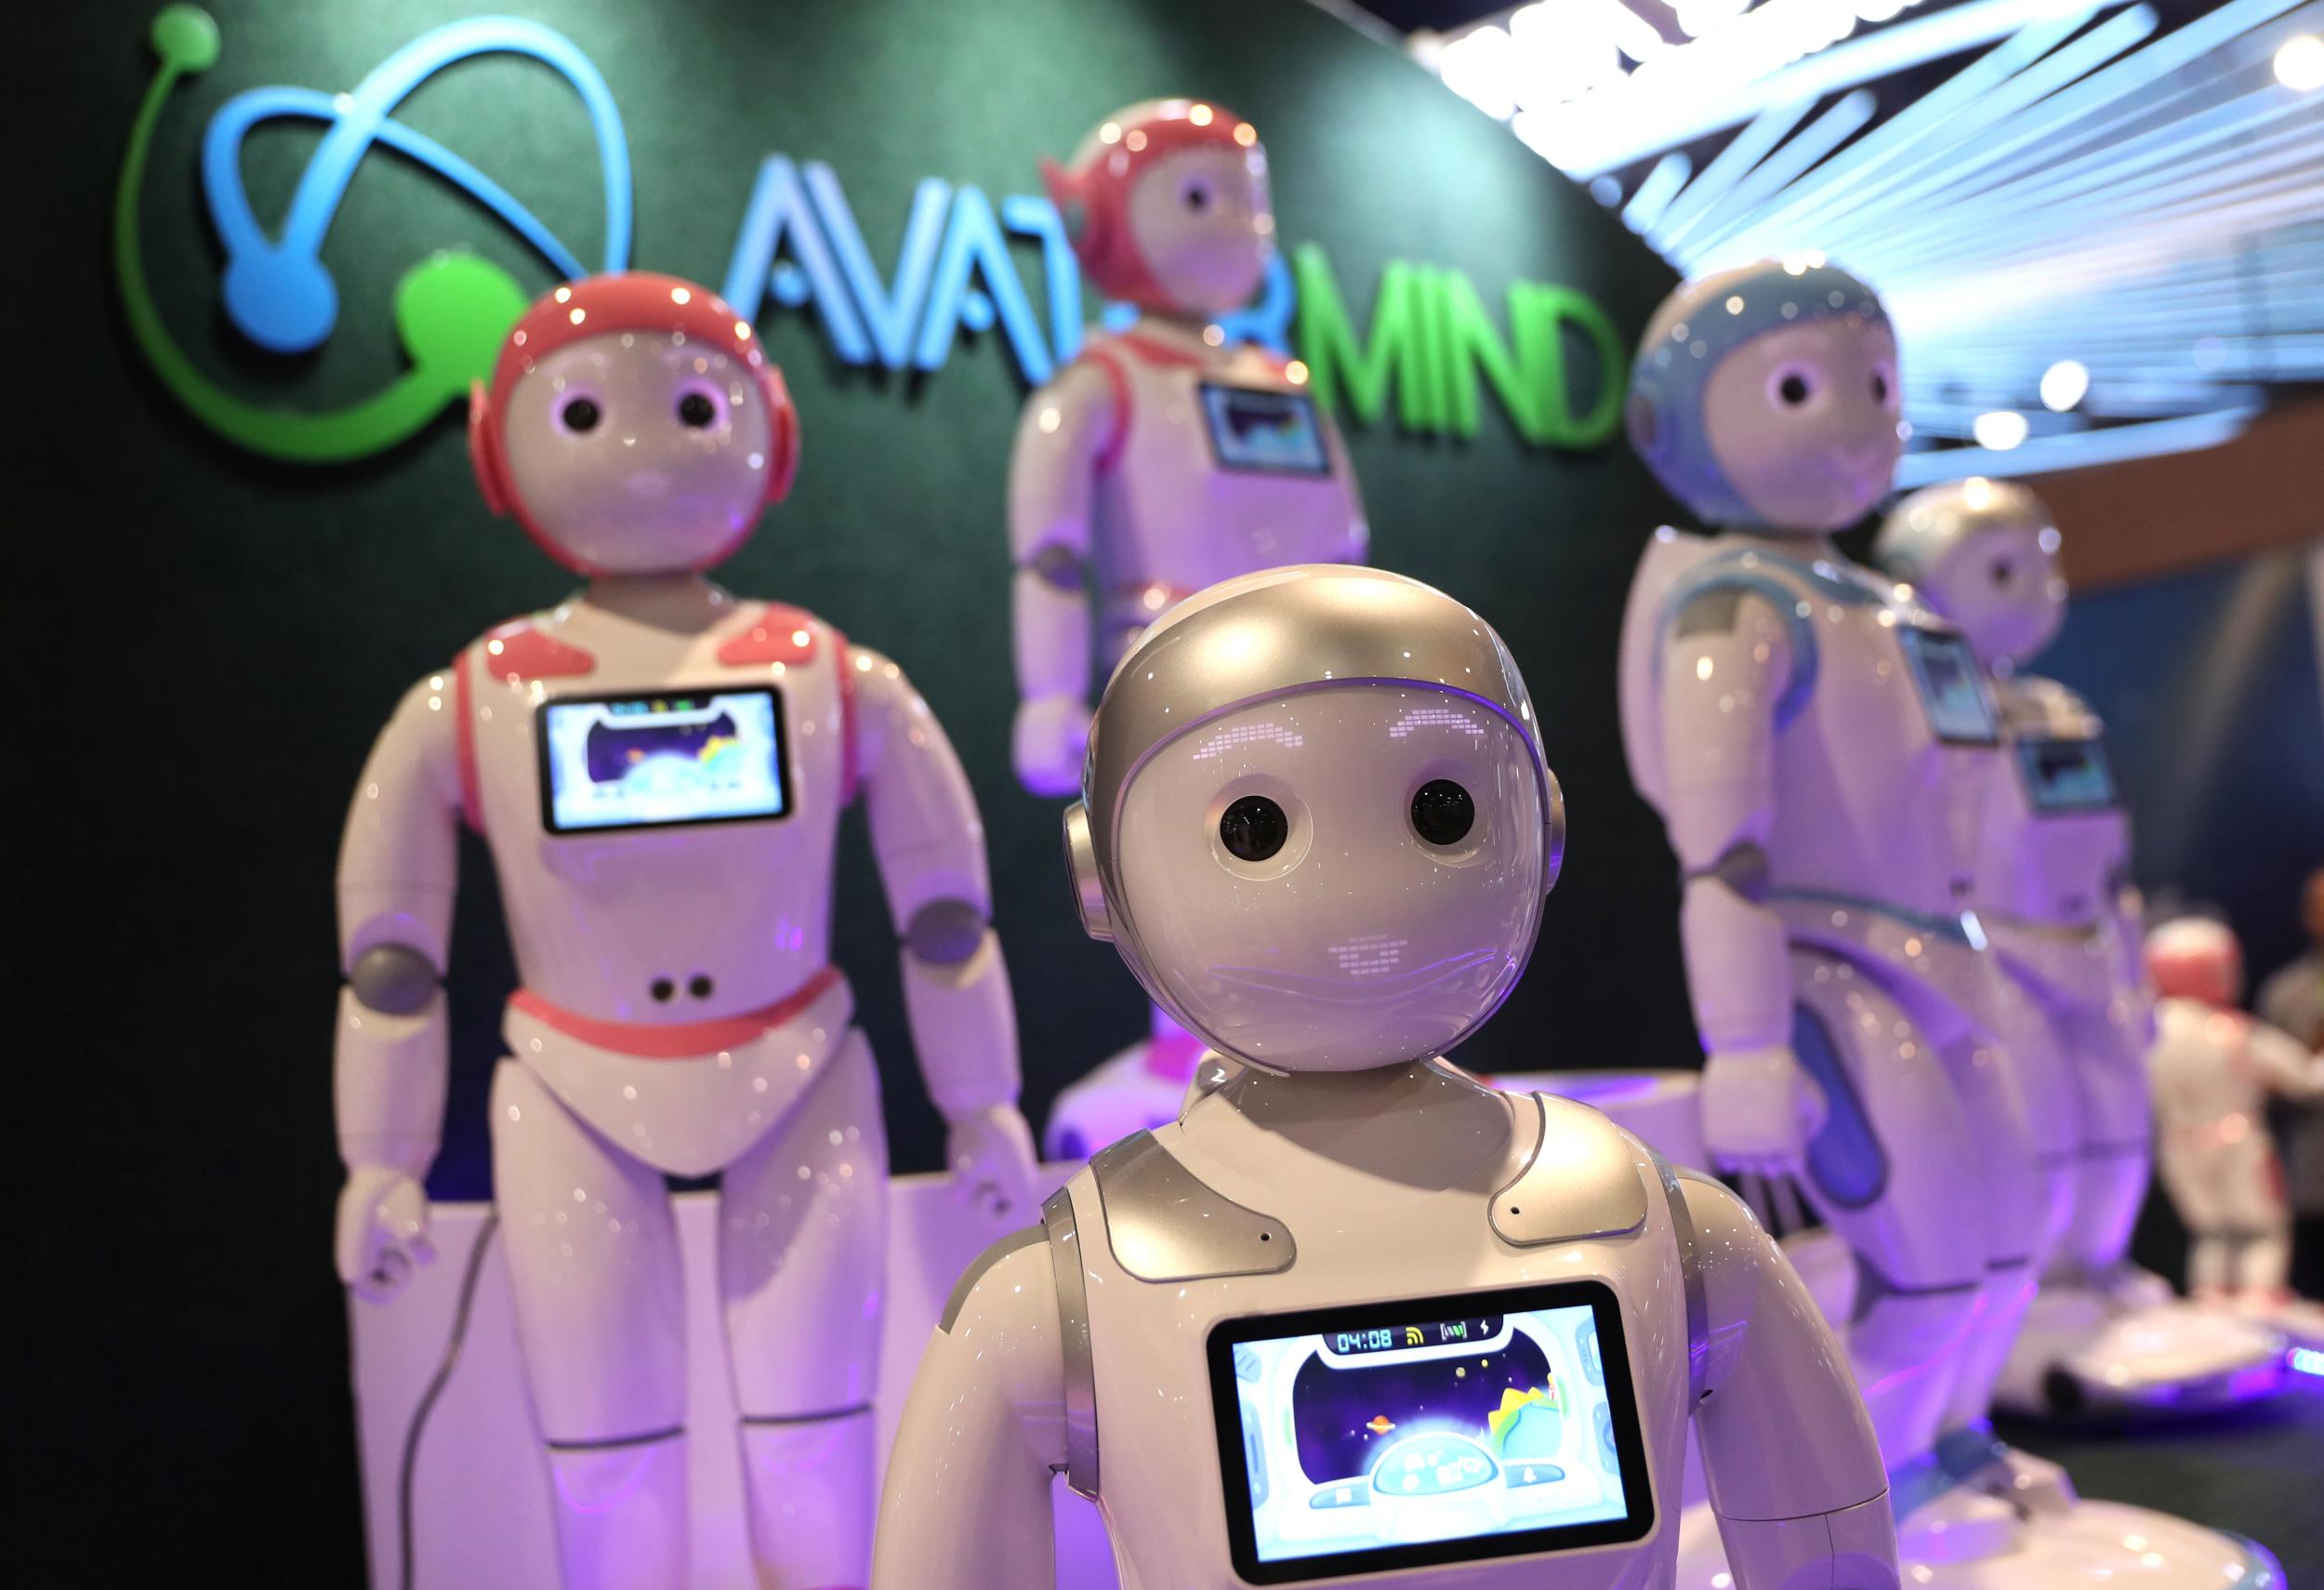 The AvatarMind iPAL Robot was displayed during CES 2019